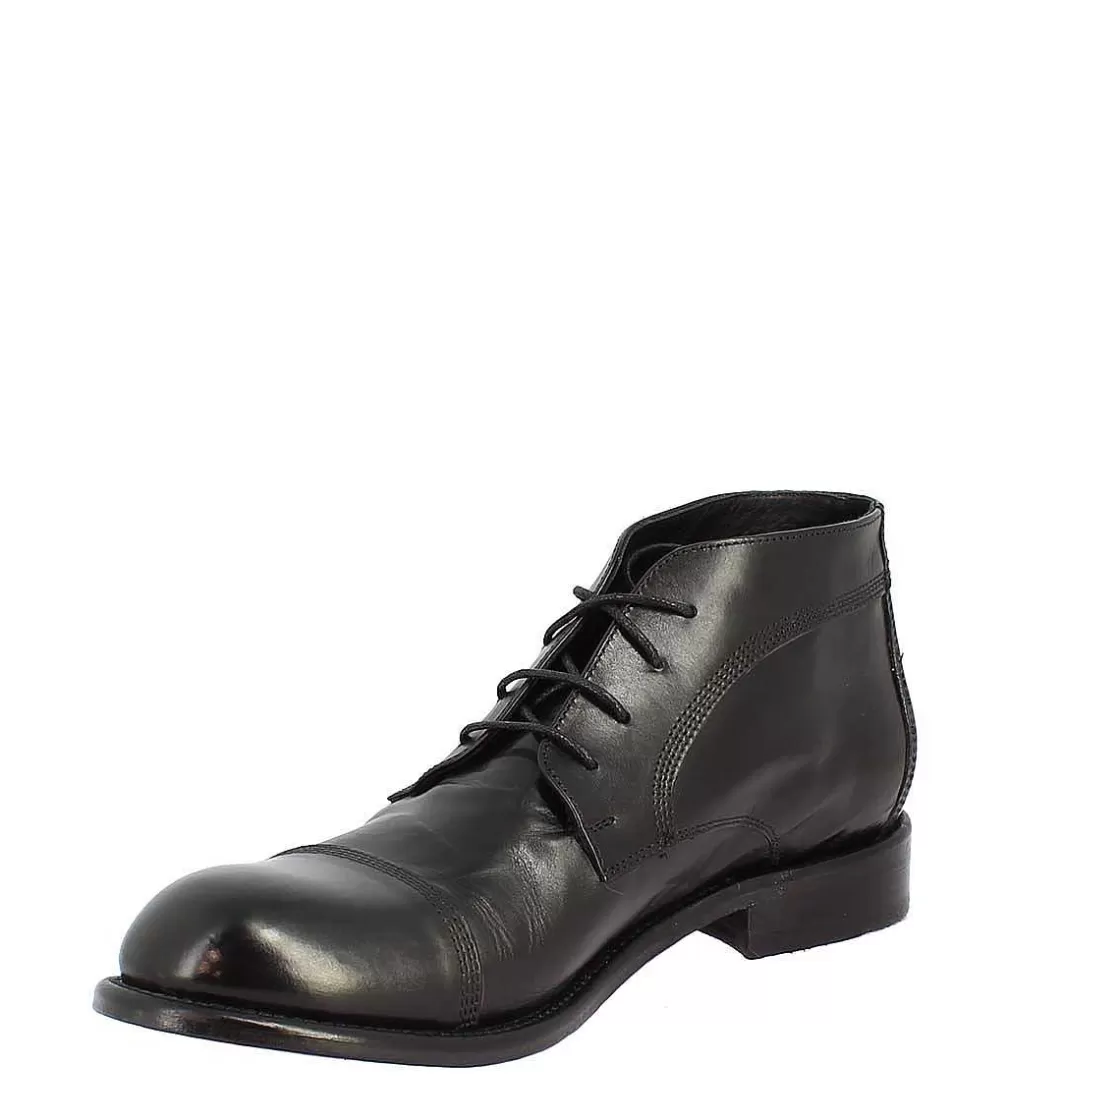 Leonardo Men'S Ankle Boot In Black Leather With Leather And Injected Rubber Sole Flash Sale